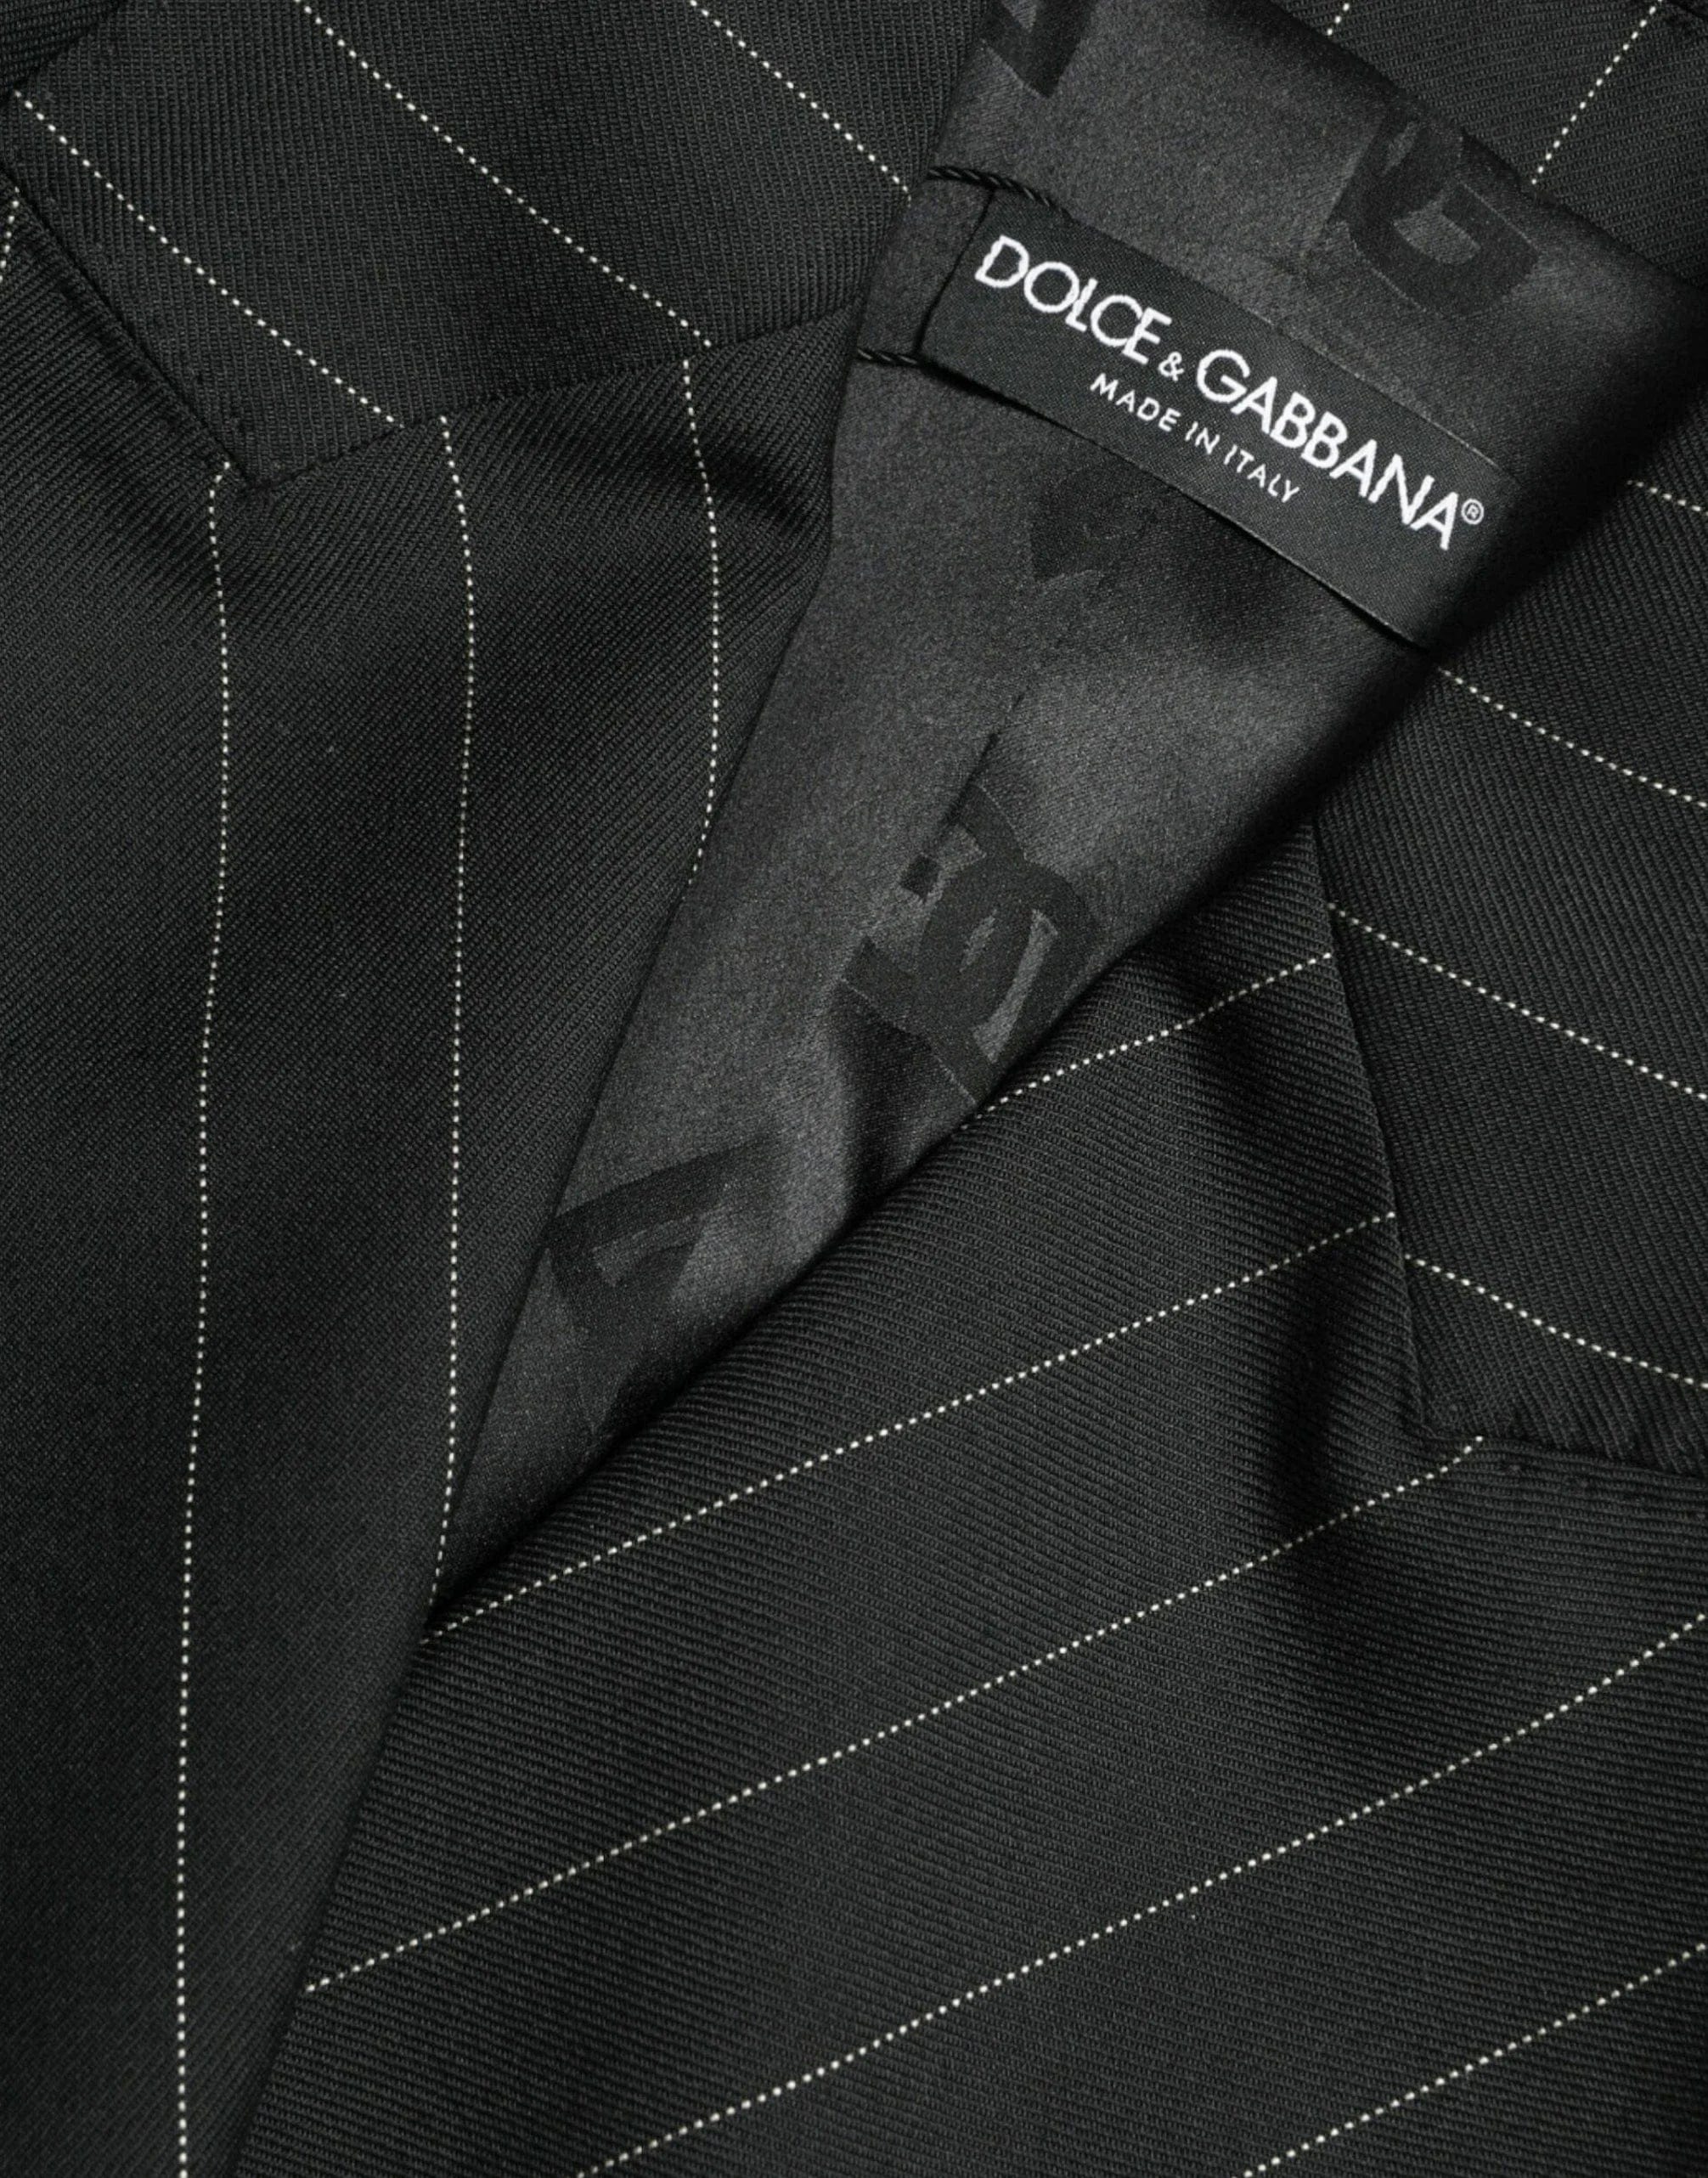 Dolce & Gabbana Double-Breasted Blazer With Stripes